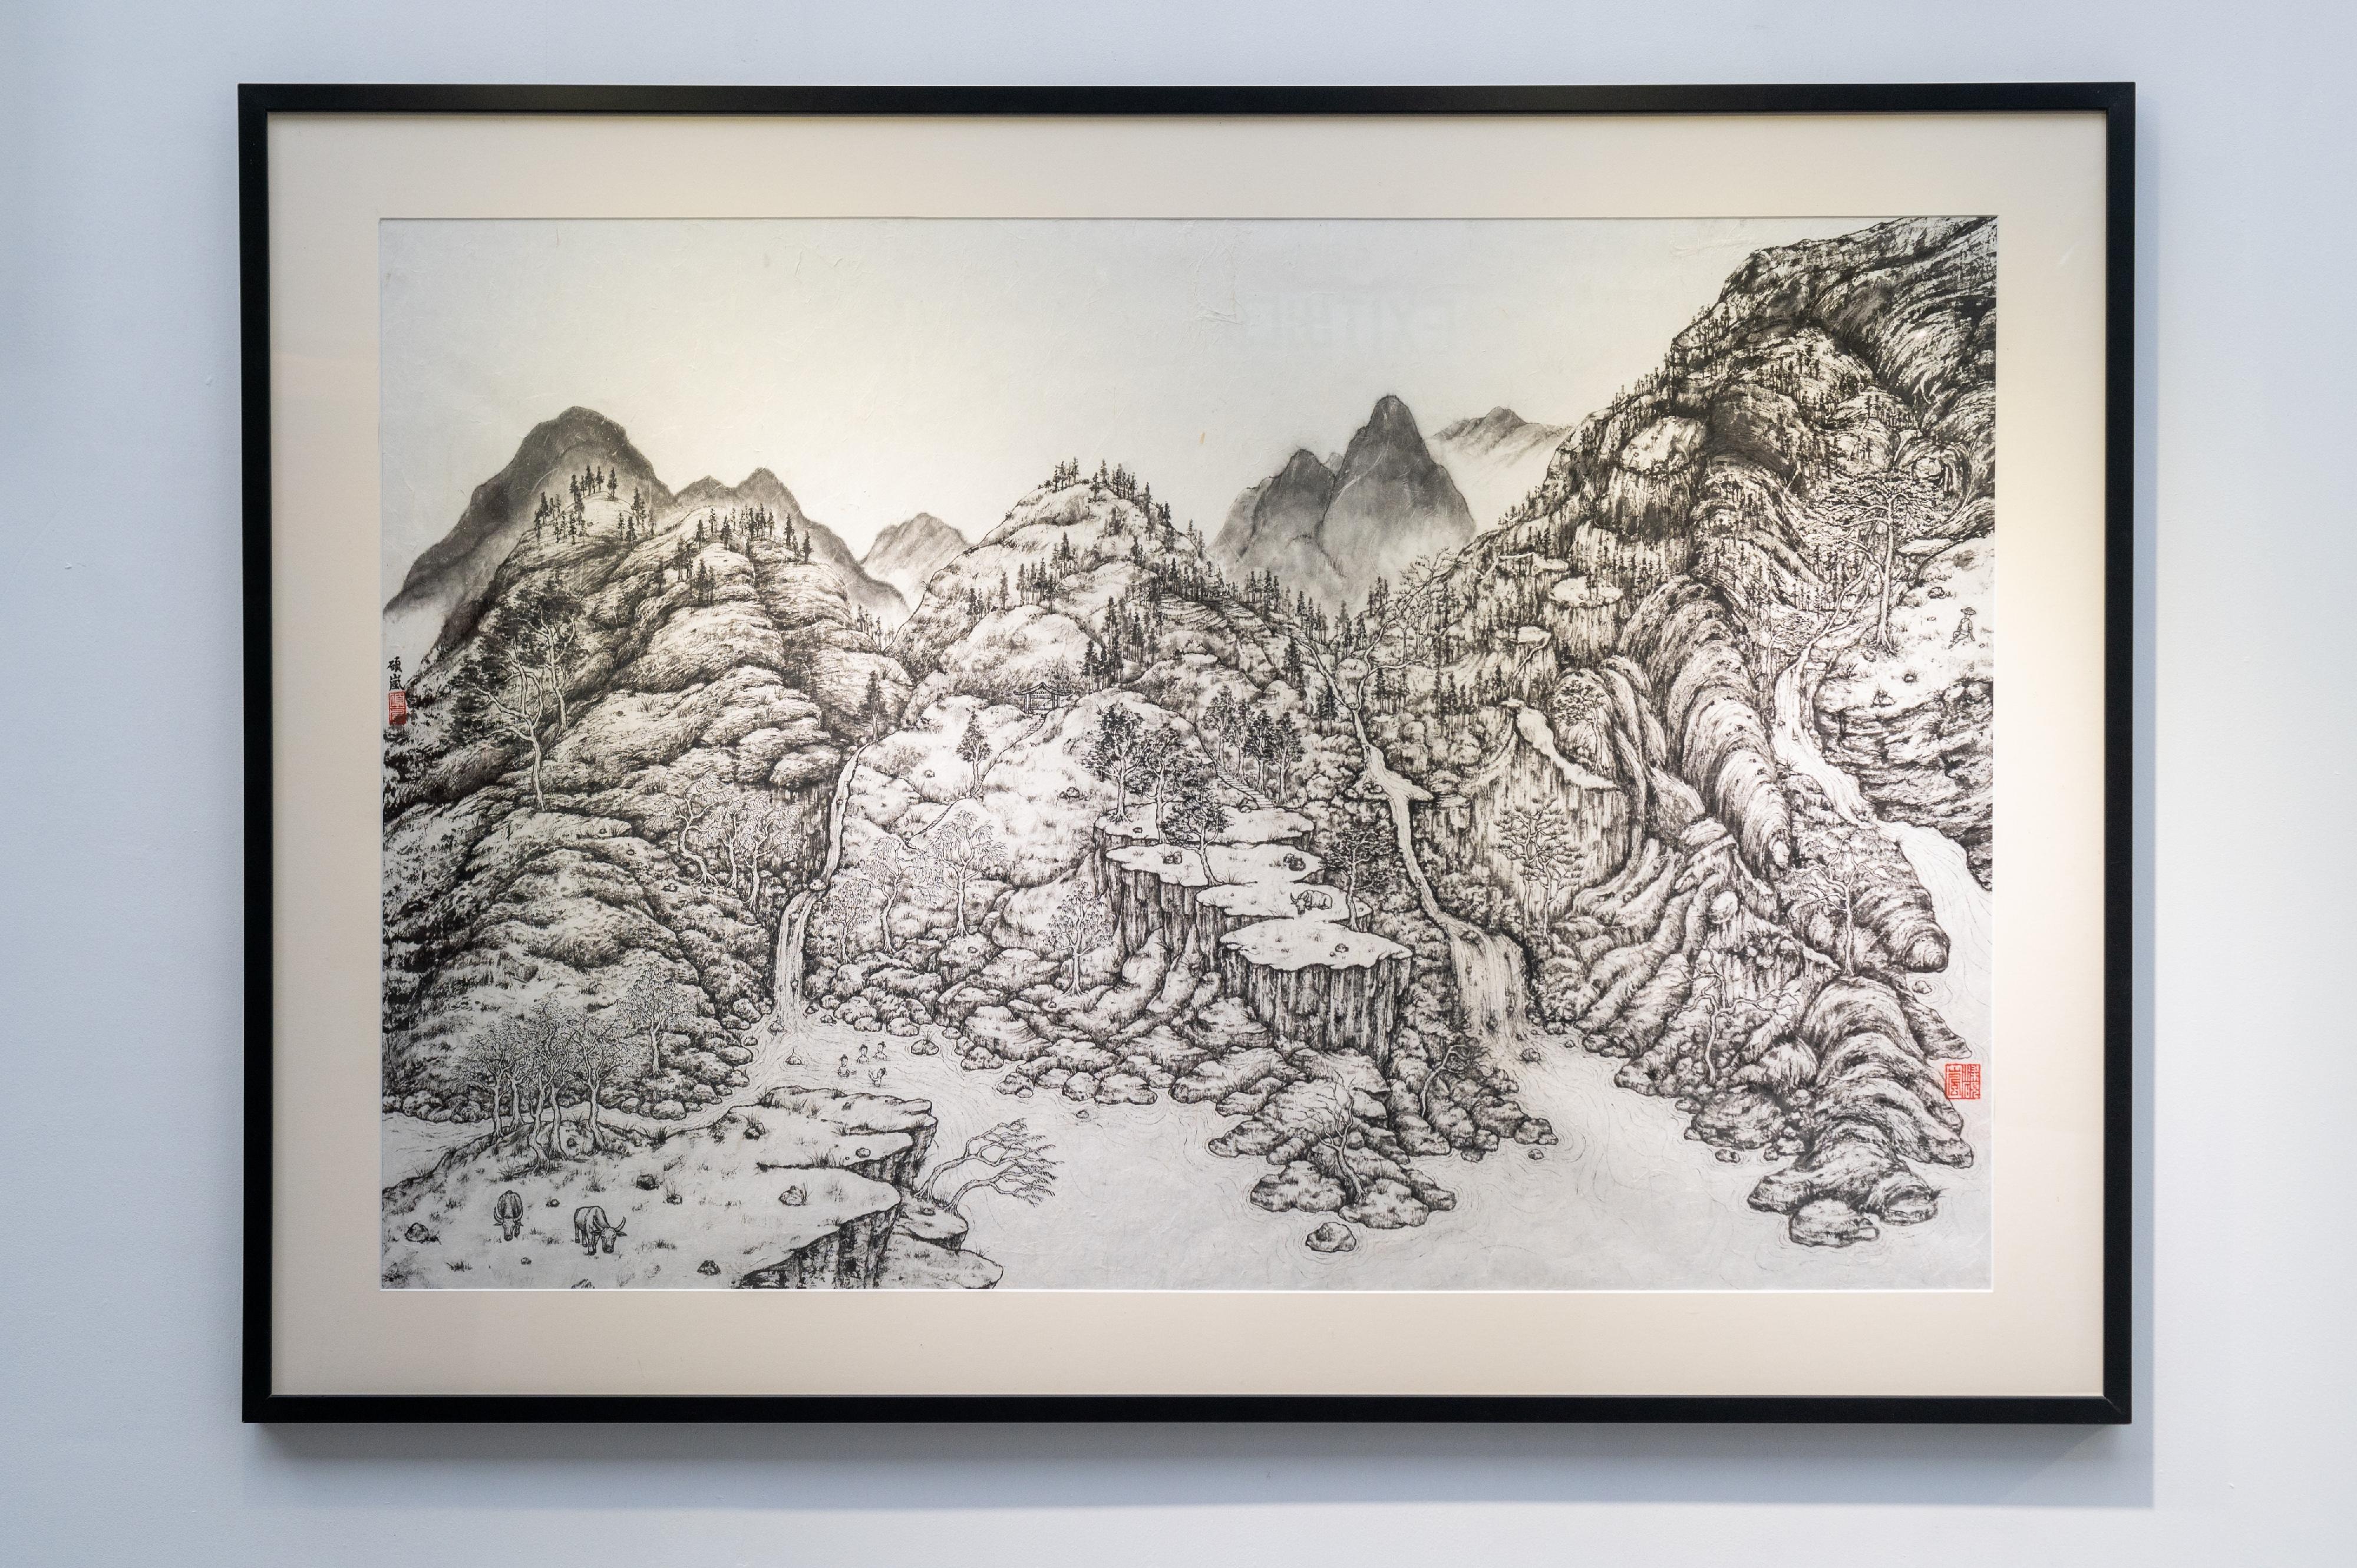 The Art Promotion Office is holding the "Art Specialist Course 2021-2022 Graduation Exhibition" from today (November 16) to showcase 19 graduates' achievements and sharing of their creative ideas. Picture shows Art Specialist Course (Chinese Art) graduate Edwin Leung's artwork "Landscape of Mental Image".